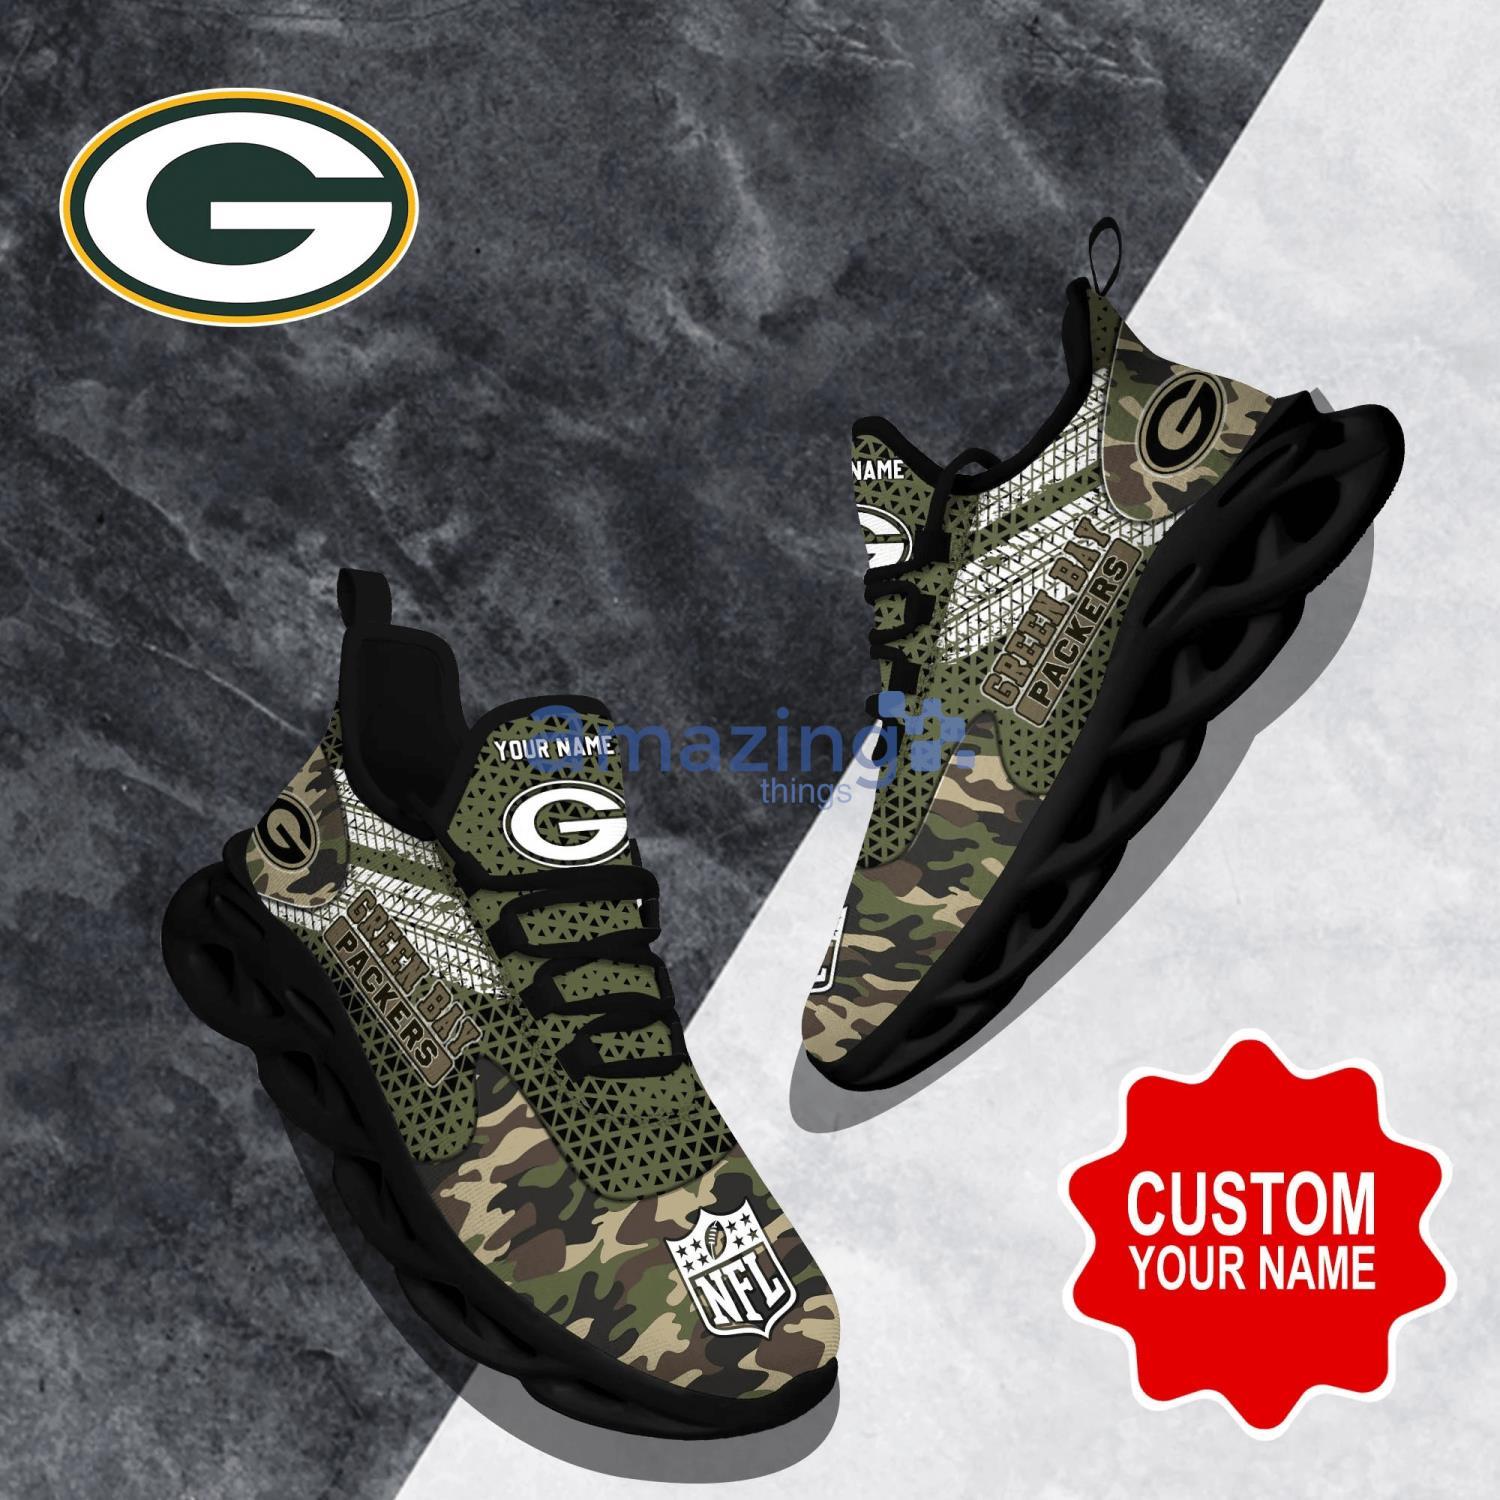 NFL BRONCOS STEELERS PACKERS BEARS CUSTOM VINYL STENCIL FOR SHOES SMALL  PROJECTS